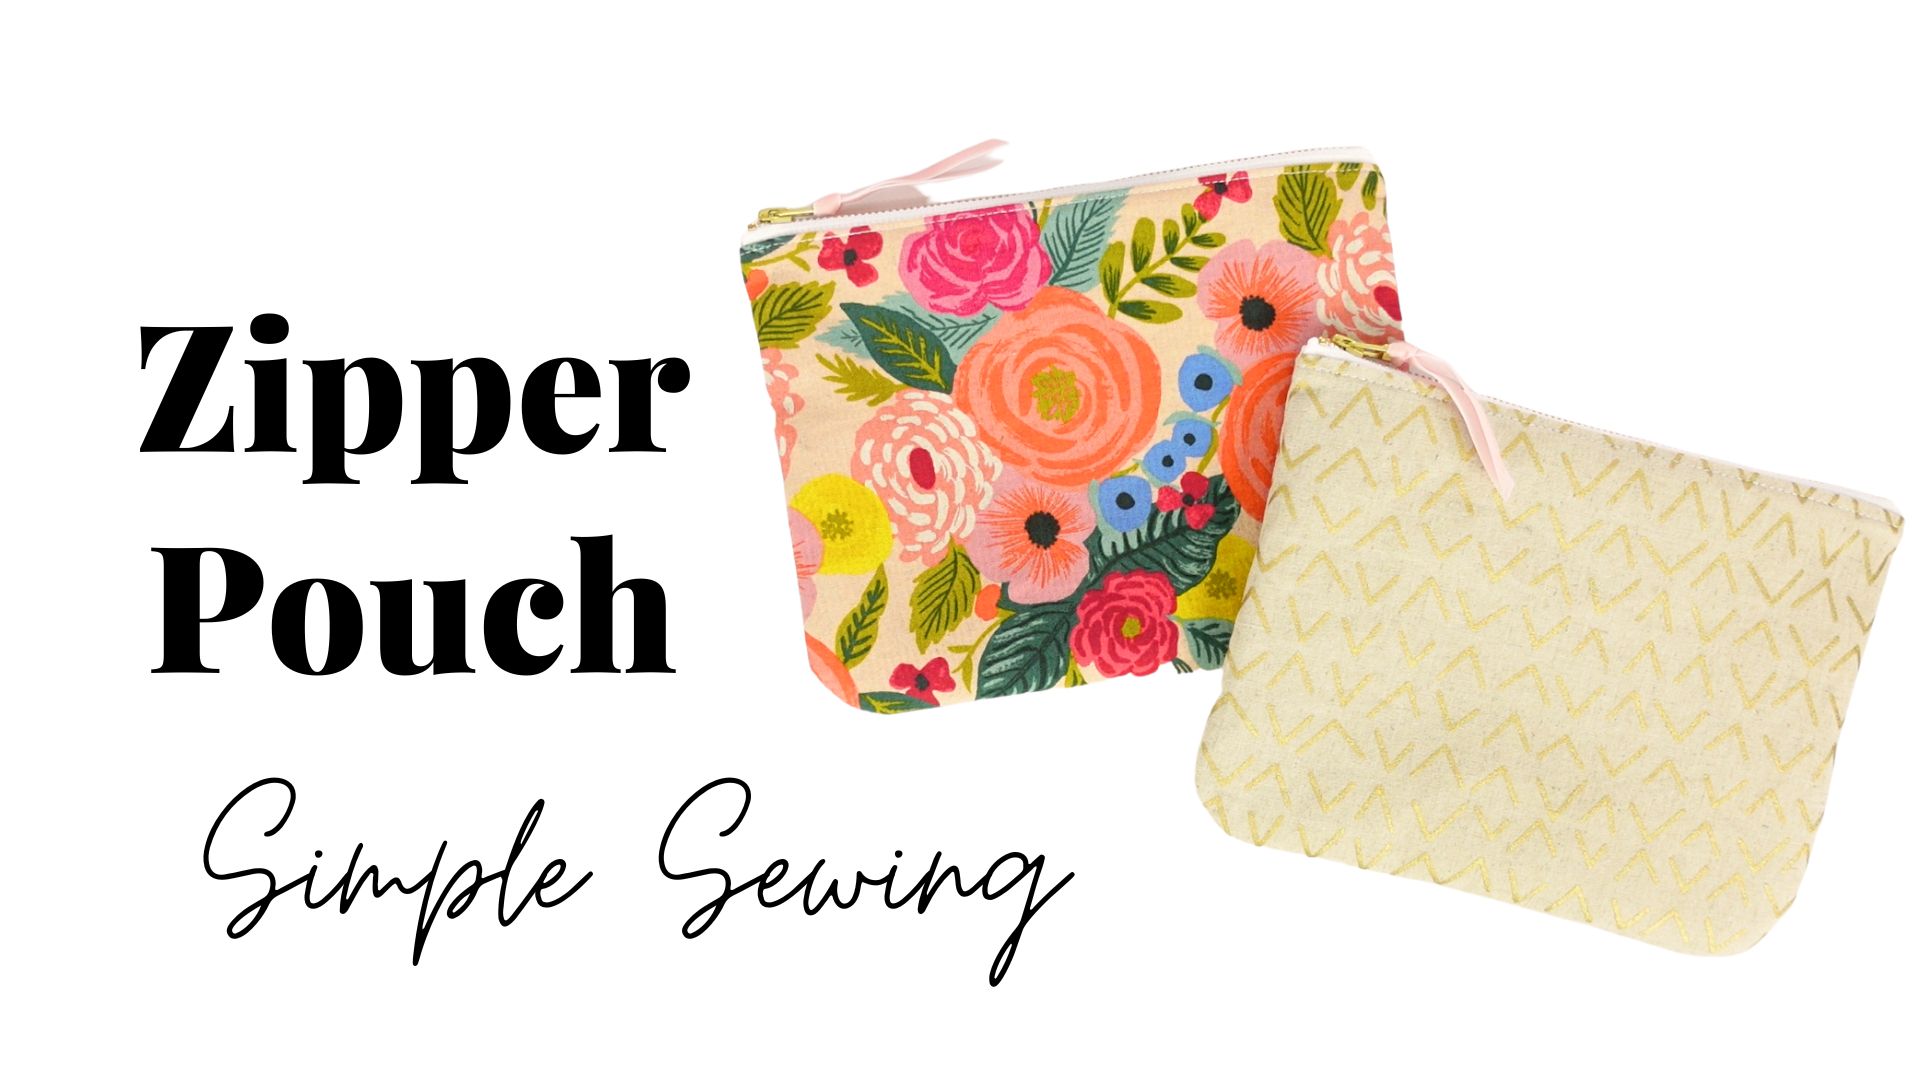 The Easiest Zipper Pouch Tutorial +FREE PATTERN